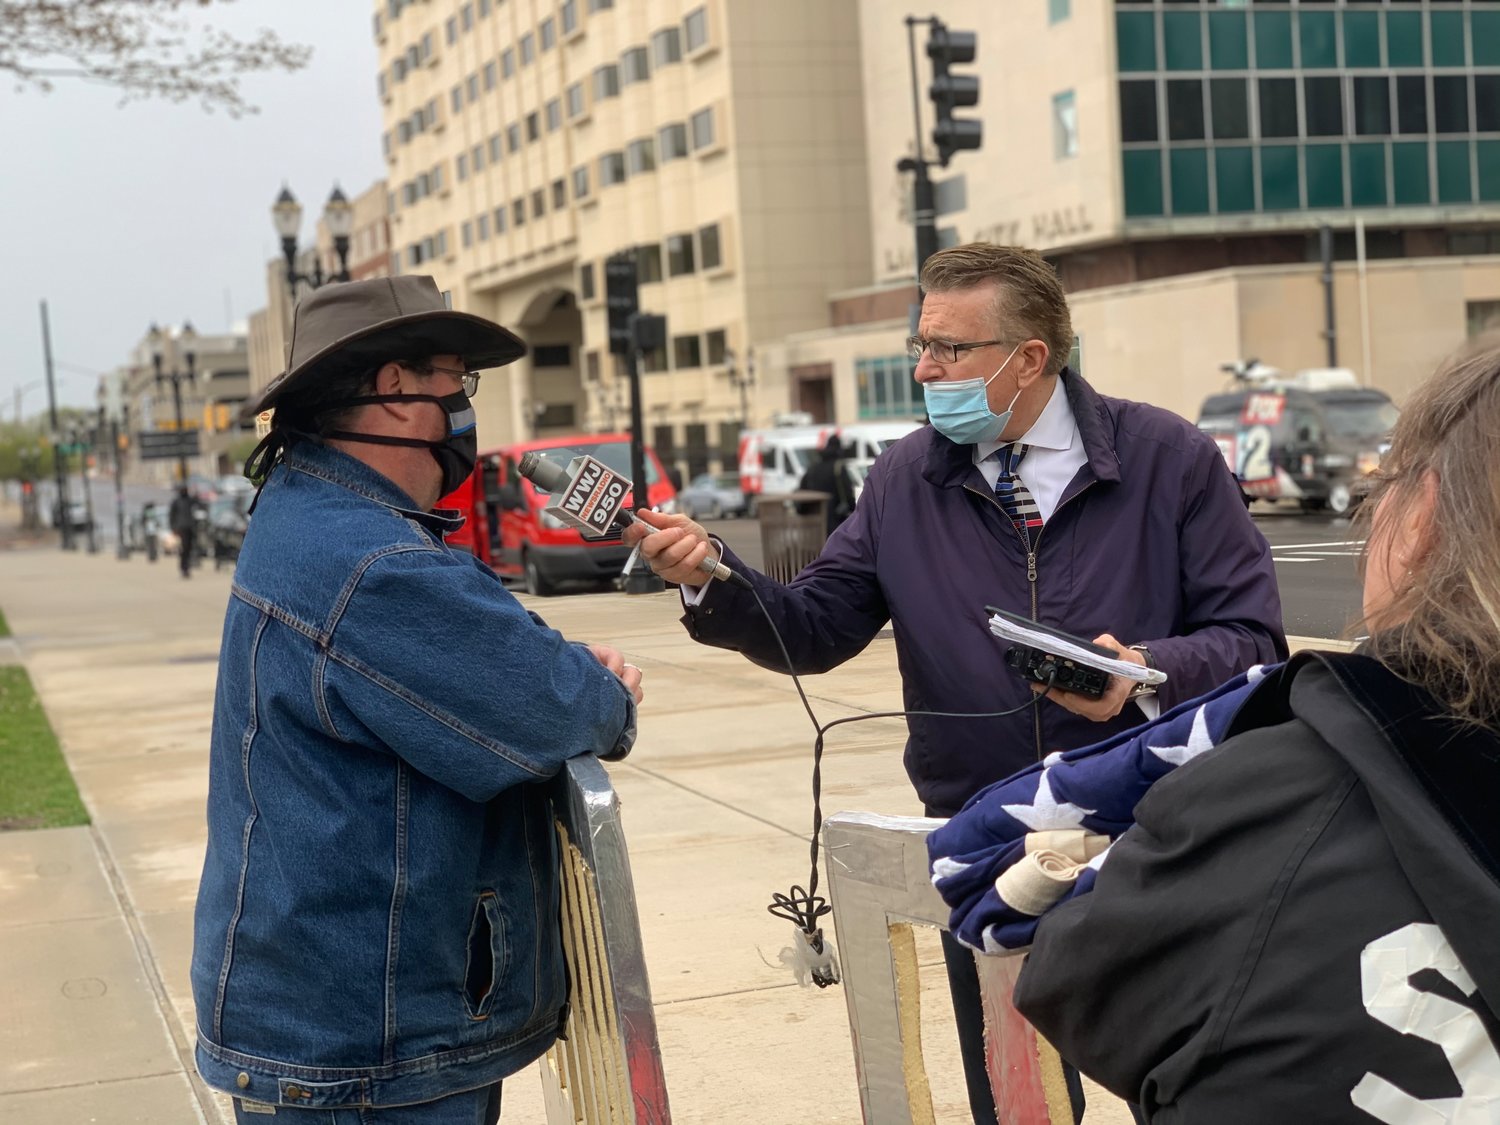 A WWJ Newsradio 950 reporter conducts an interview with his mask below his nose.